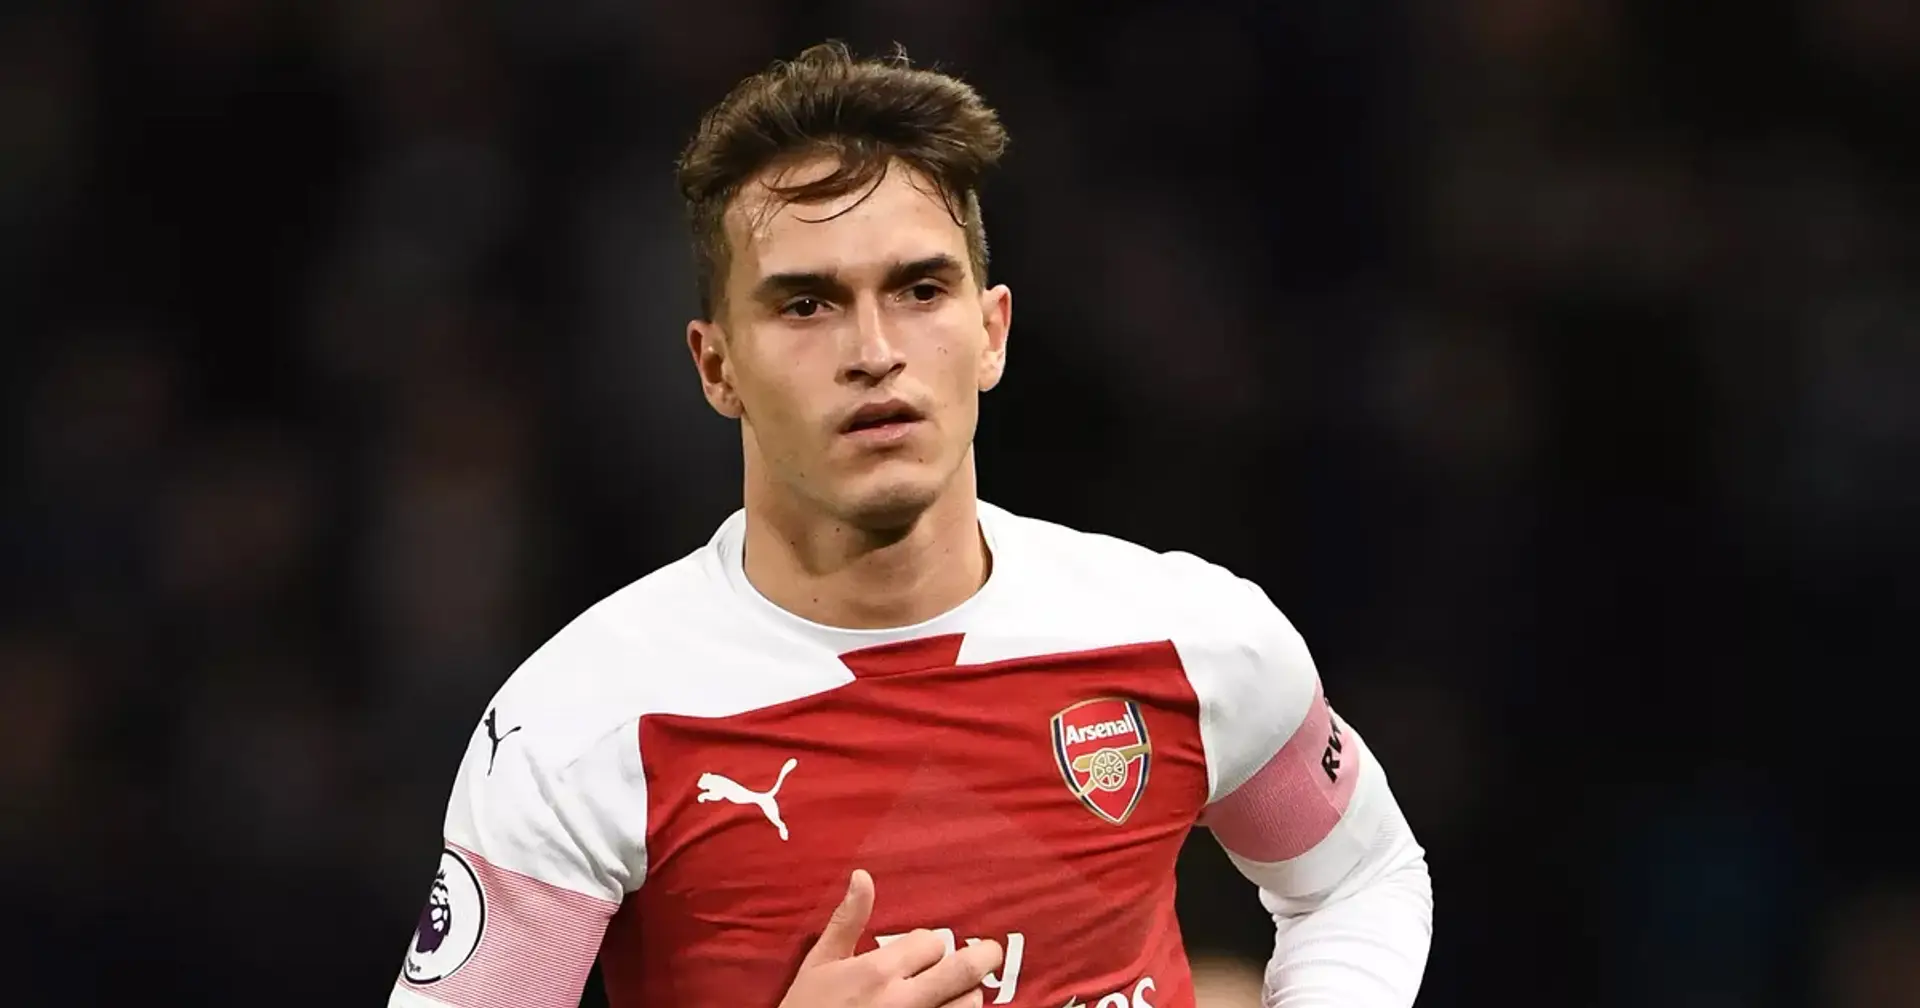 'The truth is I rejected other teams': Denis Suarez says he was serious about Arsenal move